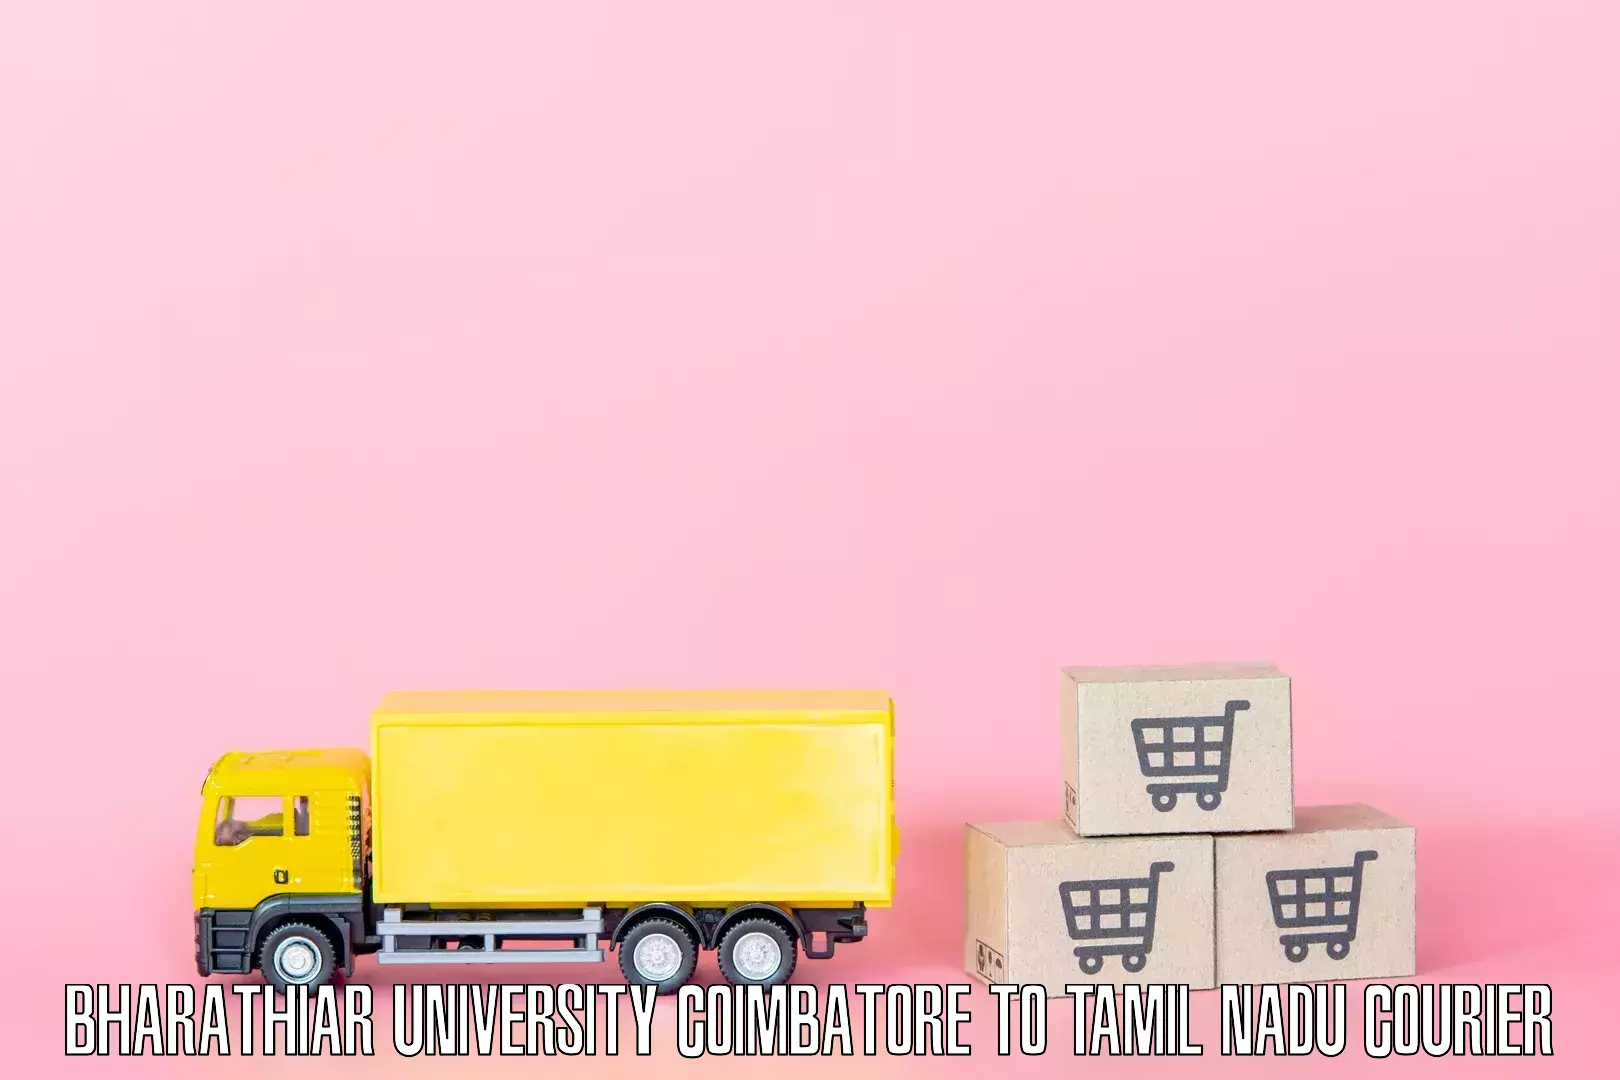 Residential moving experts in Bharathiar University Coimbatore to Coimbatore